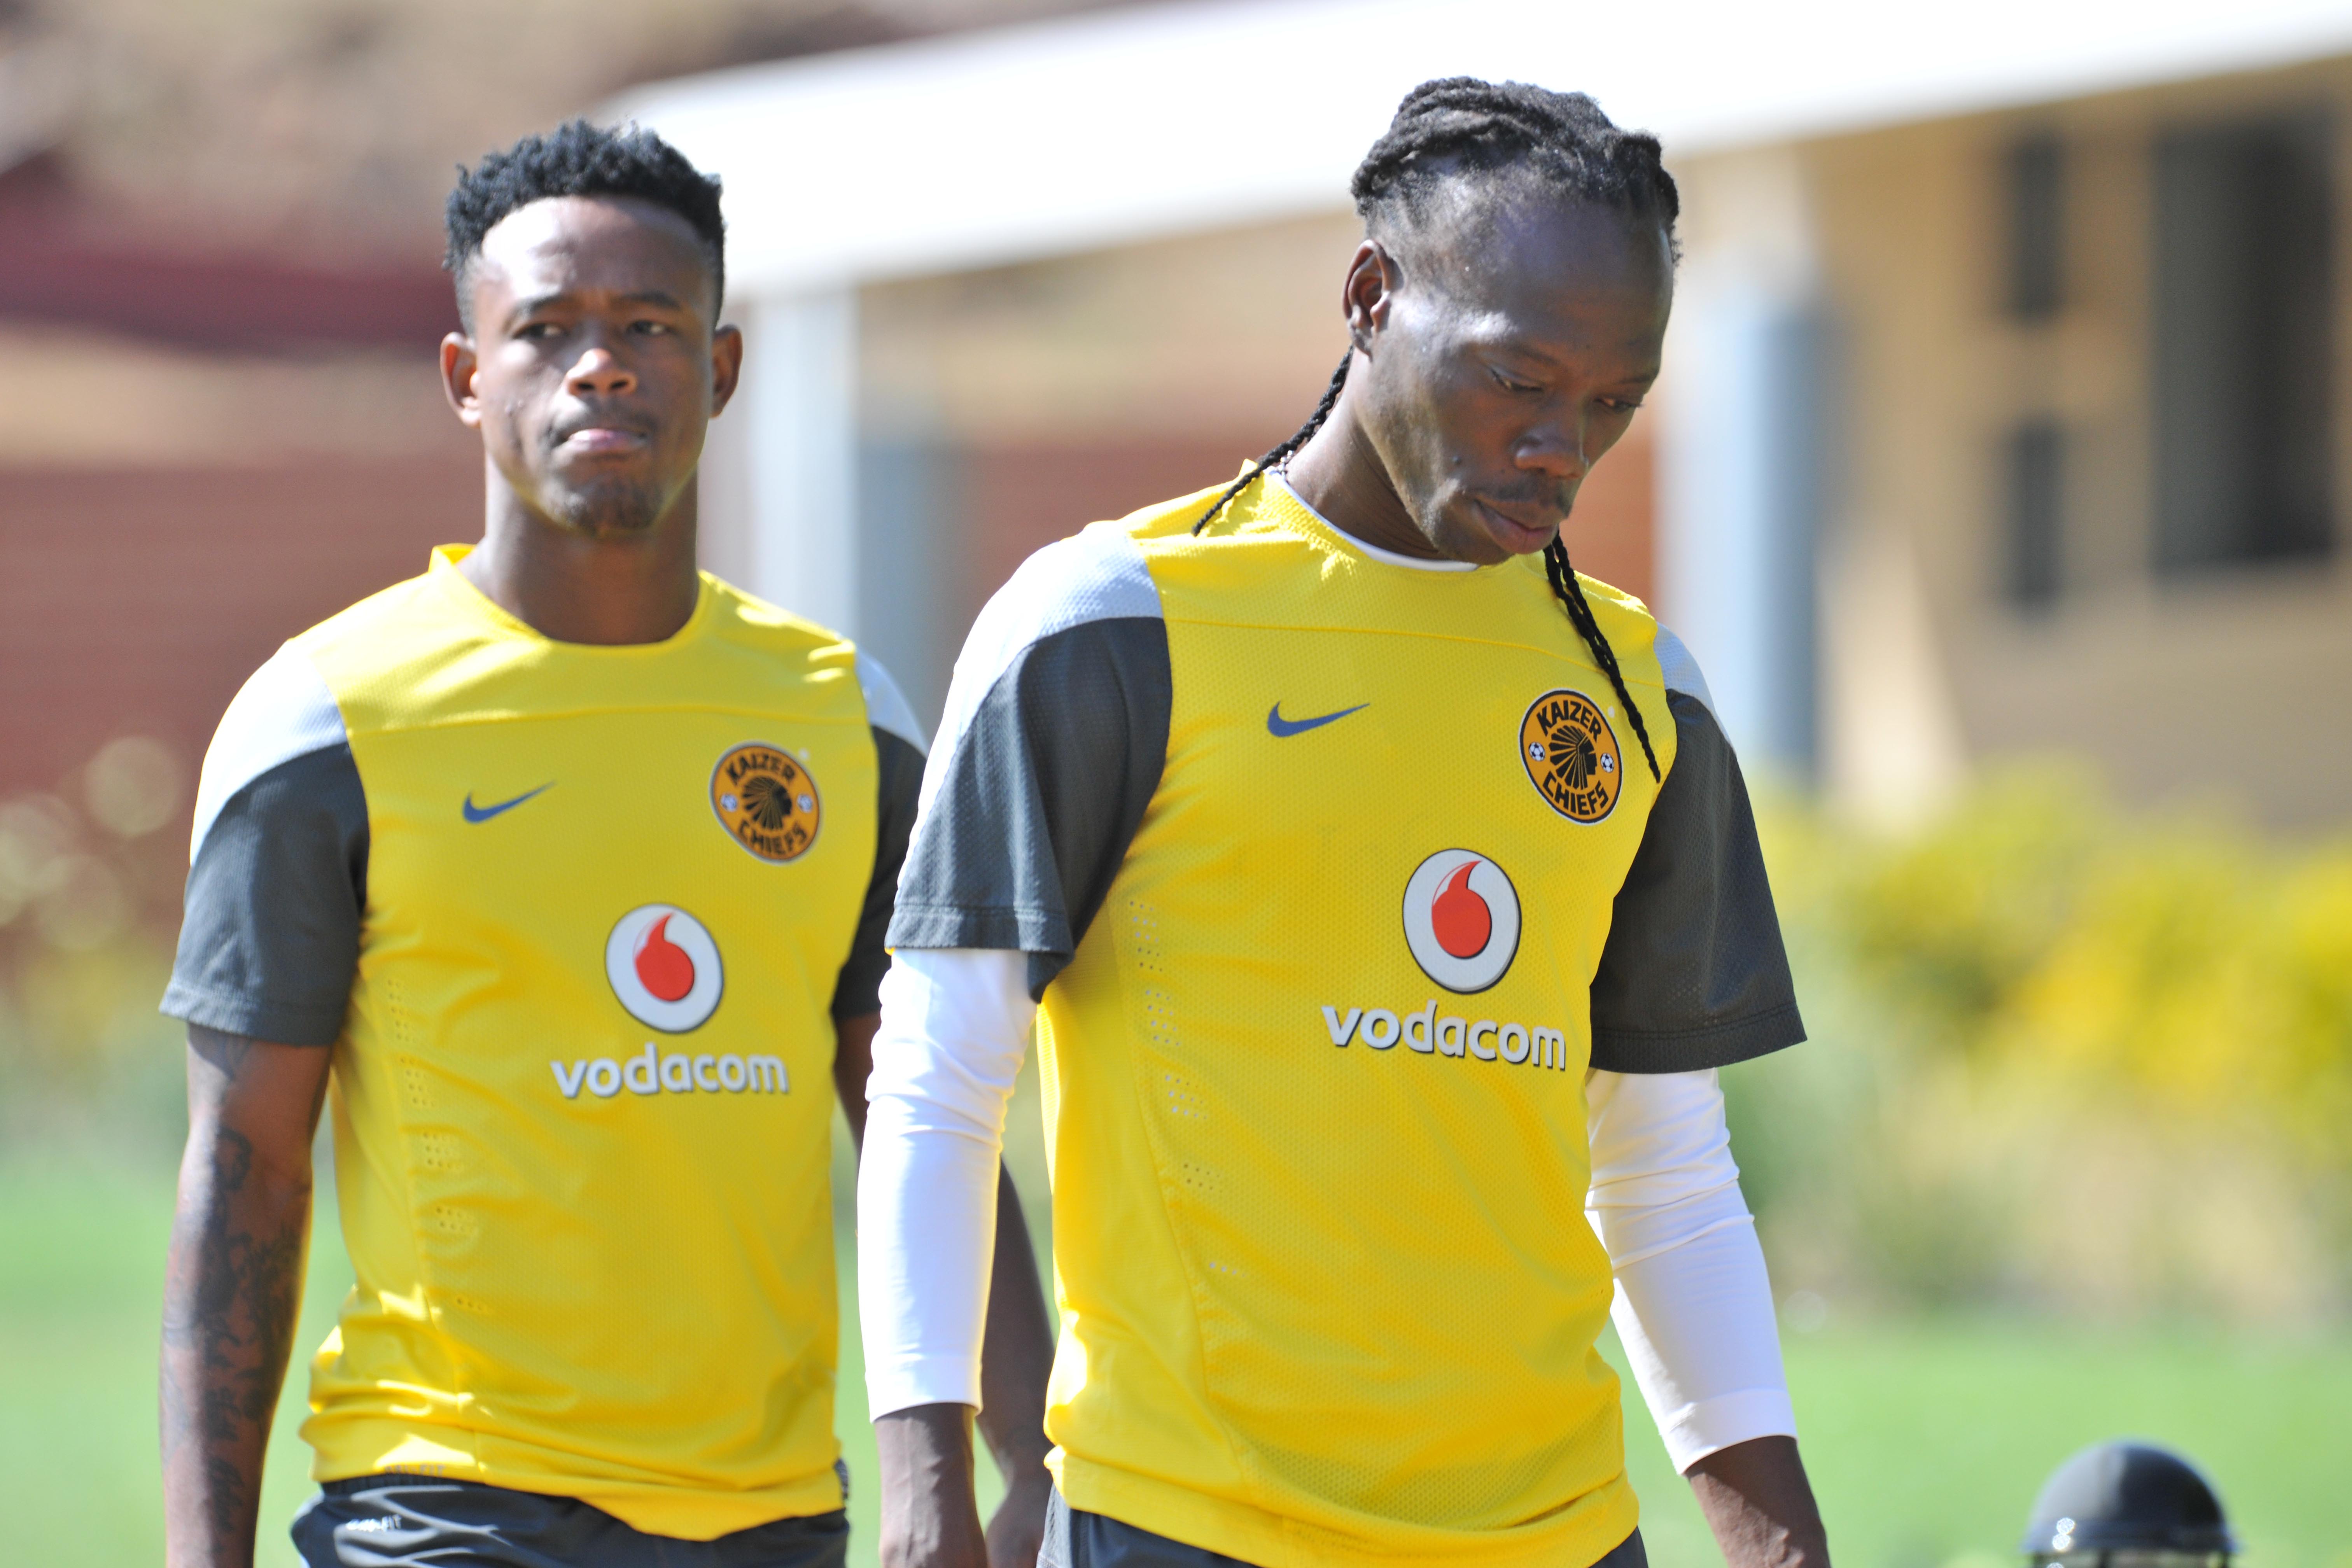 I don't think I would still be playing football if I stayed at Kaizer Chiefs - Letsholonyane